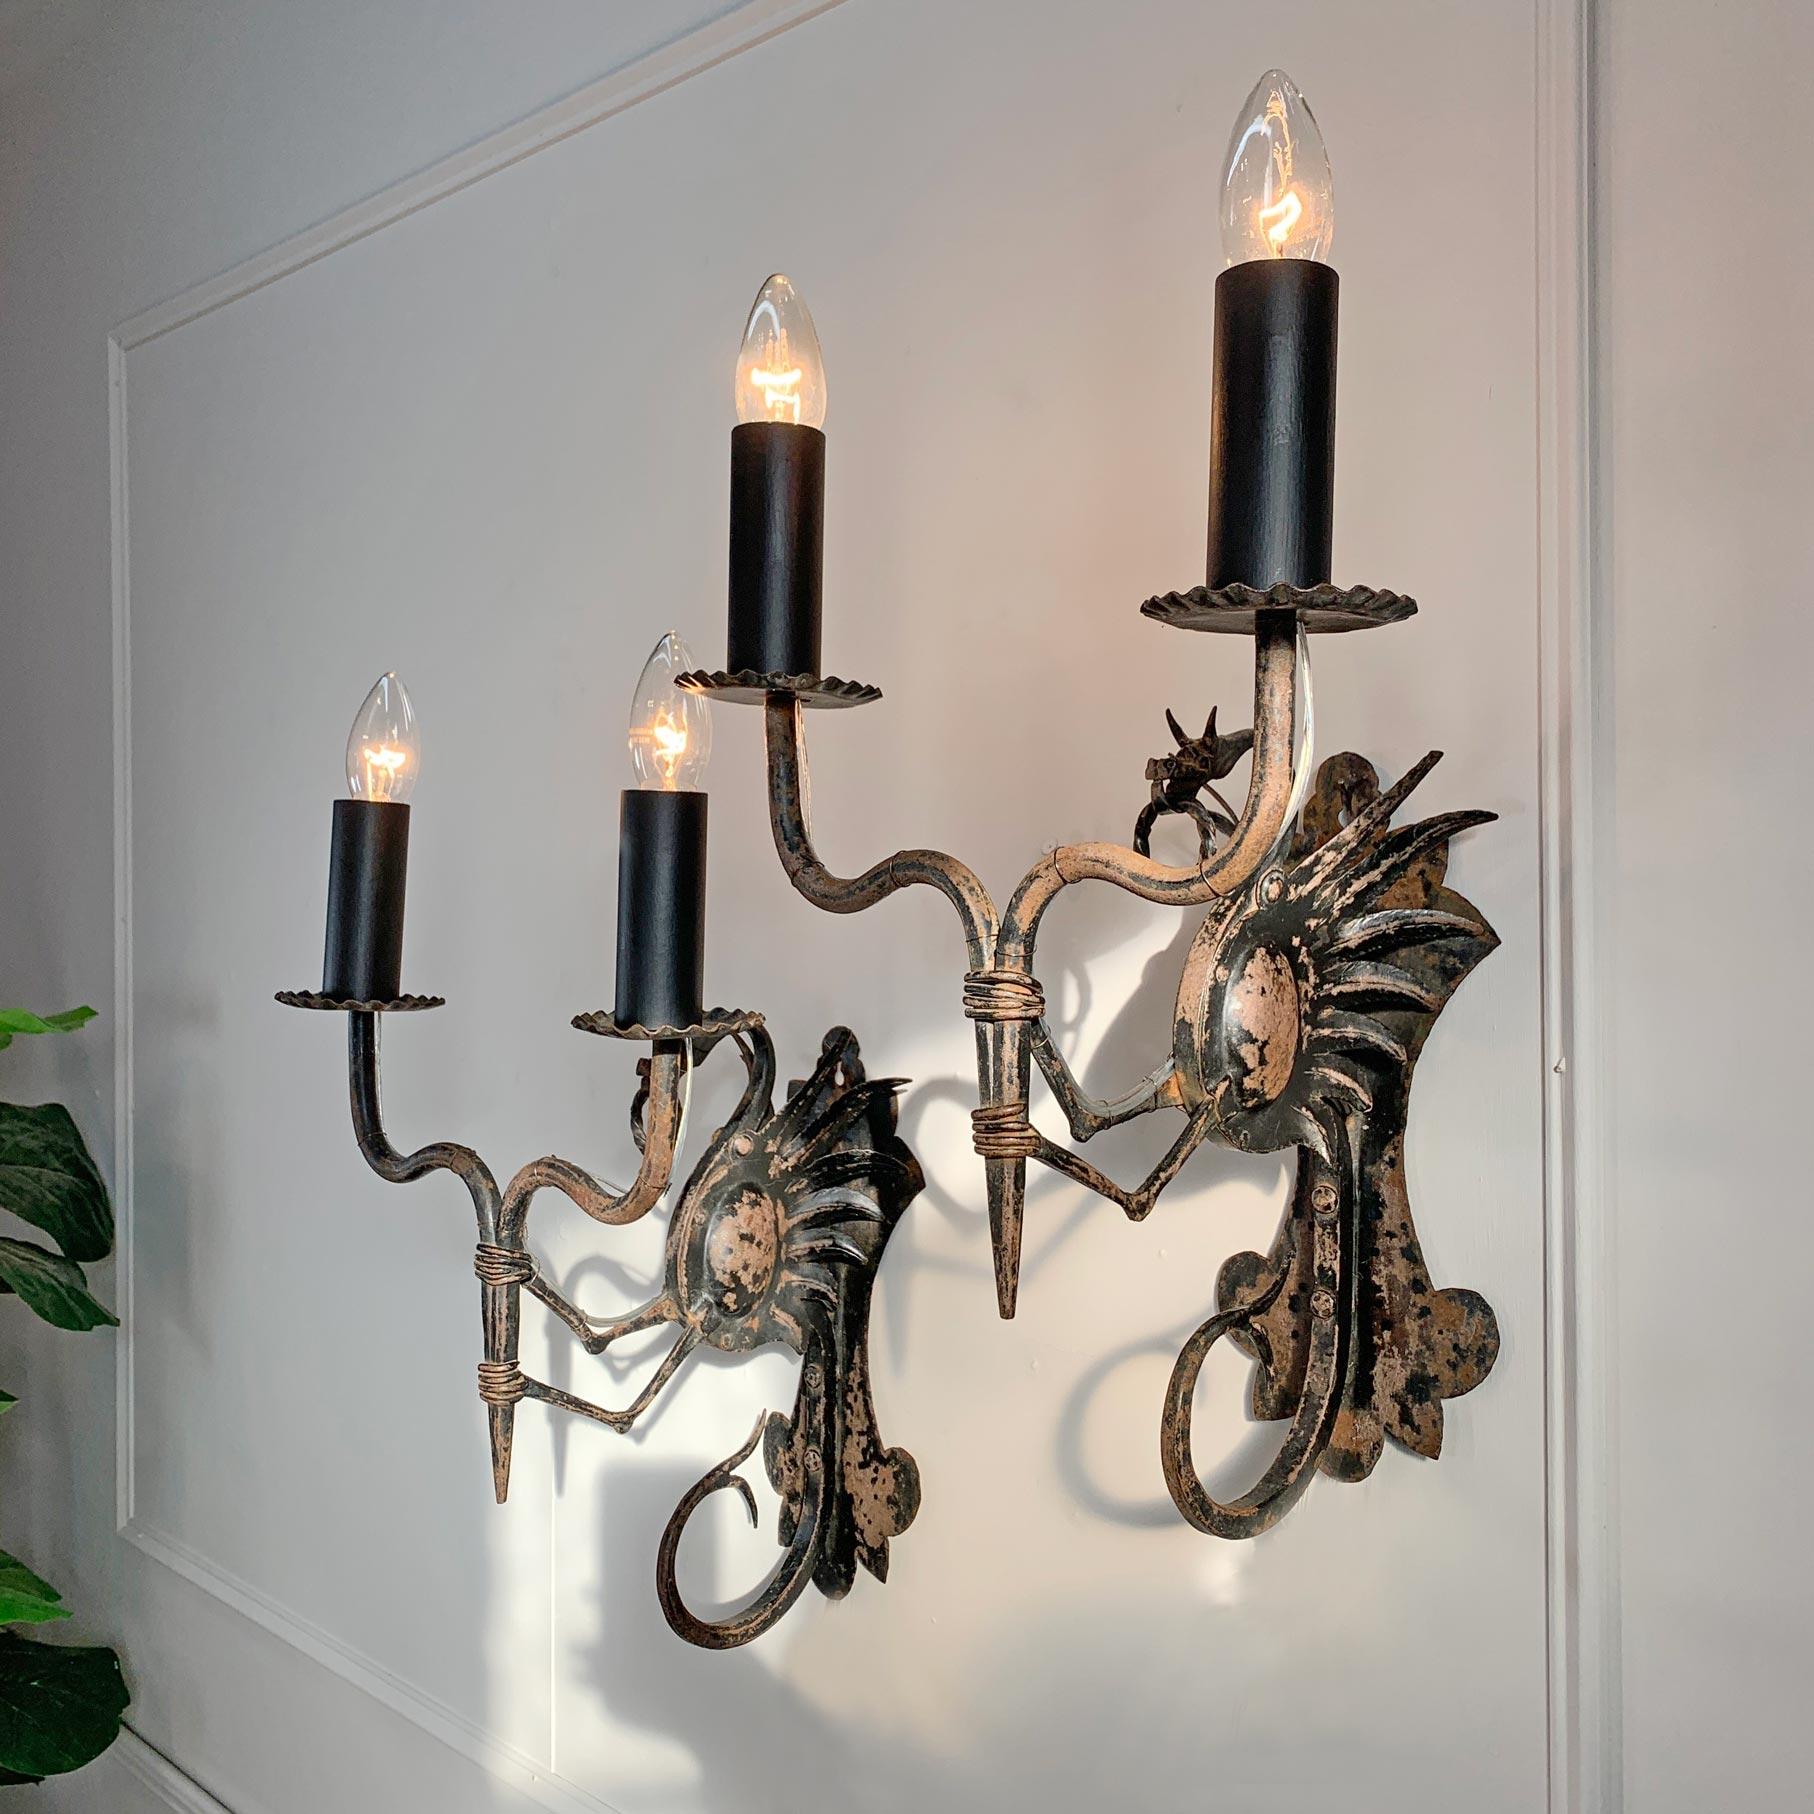 An incredible pair of late 19th century wrought iron wall lights/ torchiere's. This stunning pair of hand crafted Dragons are attributed to the Italian Master Ironworker Alessandro Mazzucotelli. These would have originally been holding candles but